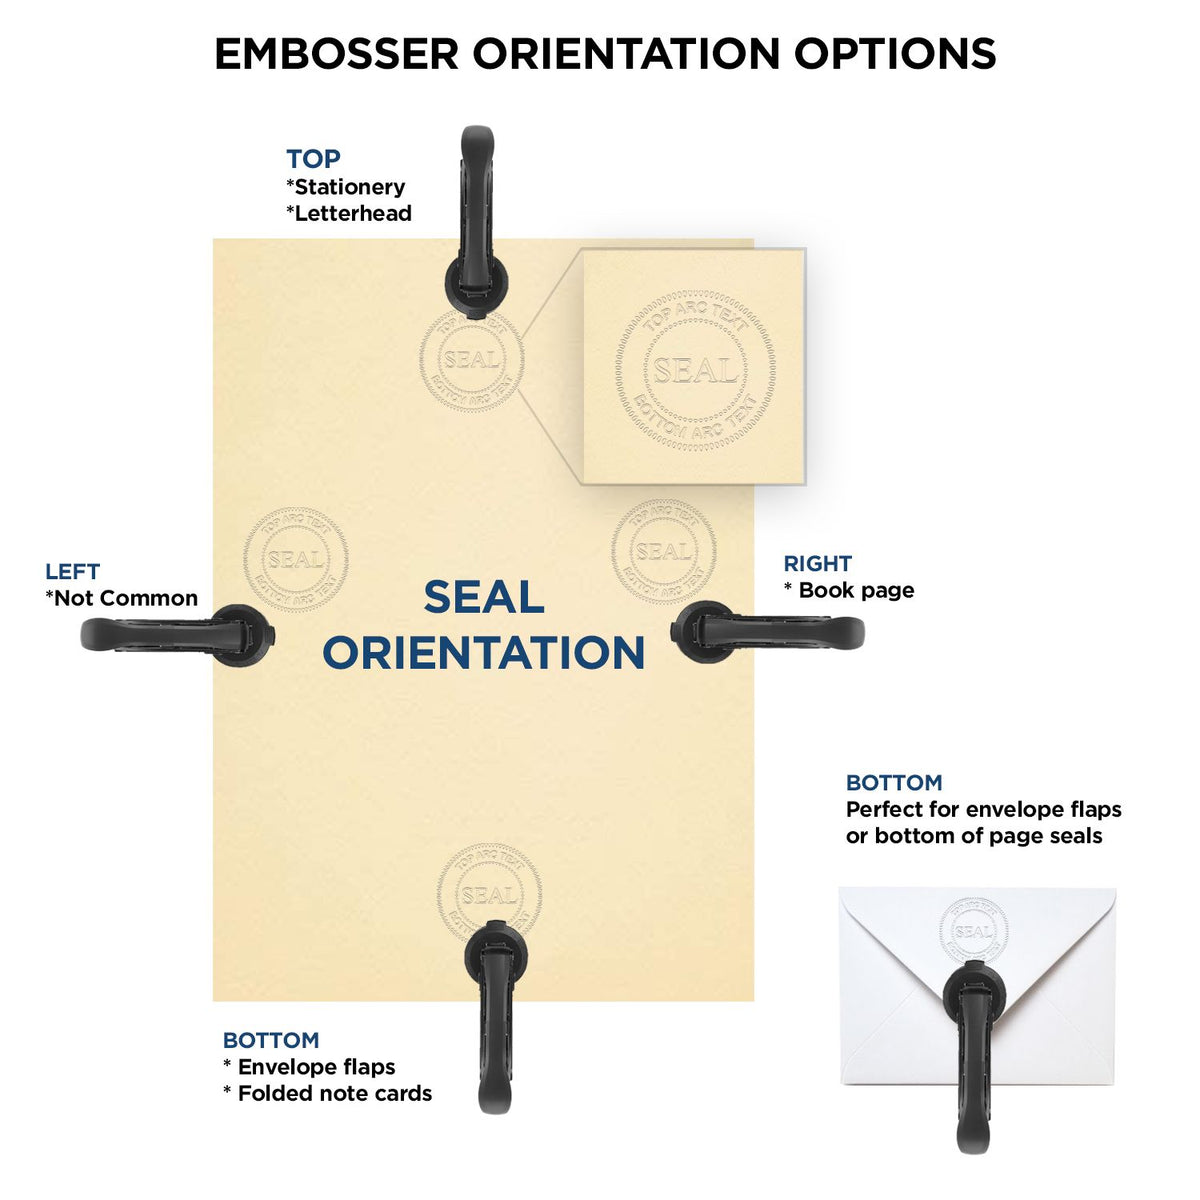 An infographic for the Gift Indiana Land Surveyor Seal showing embosser orientation, this is showing examples of a top, bottom, right and left insert.